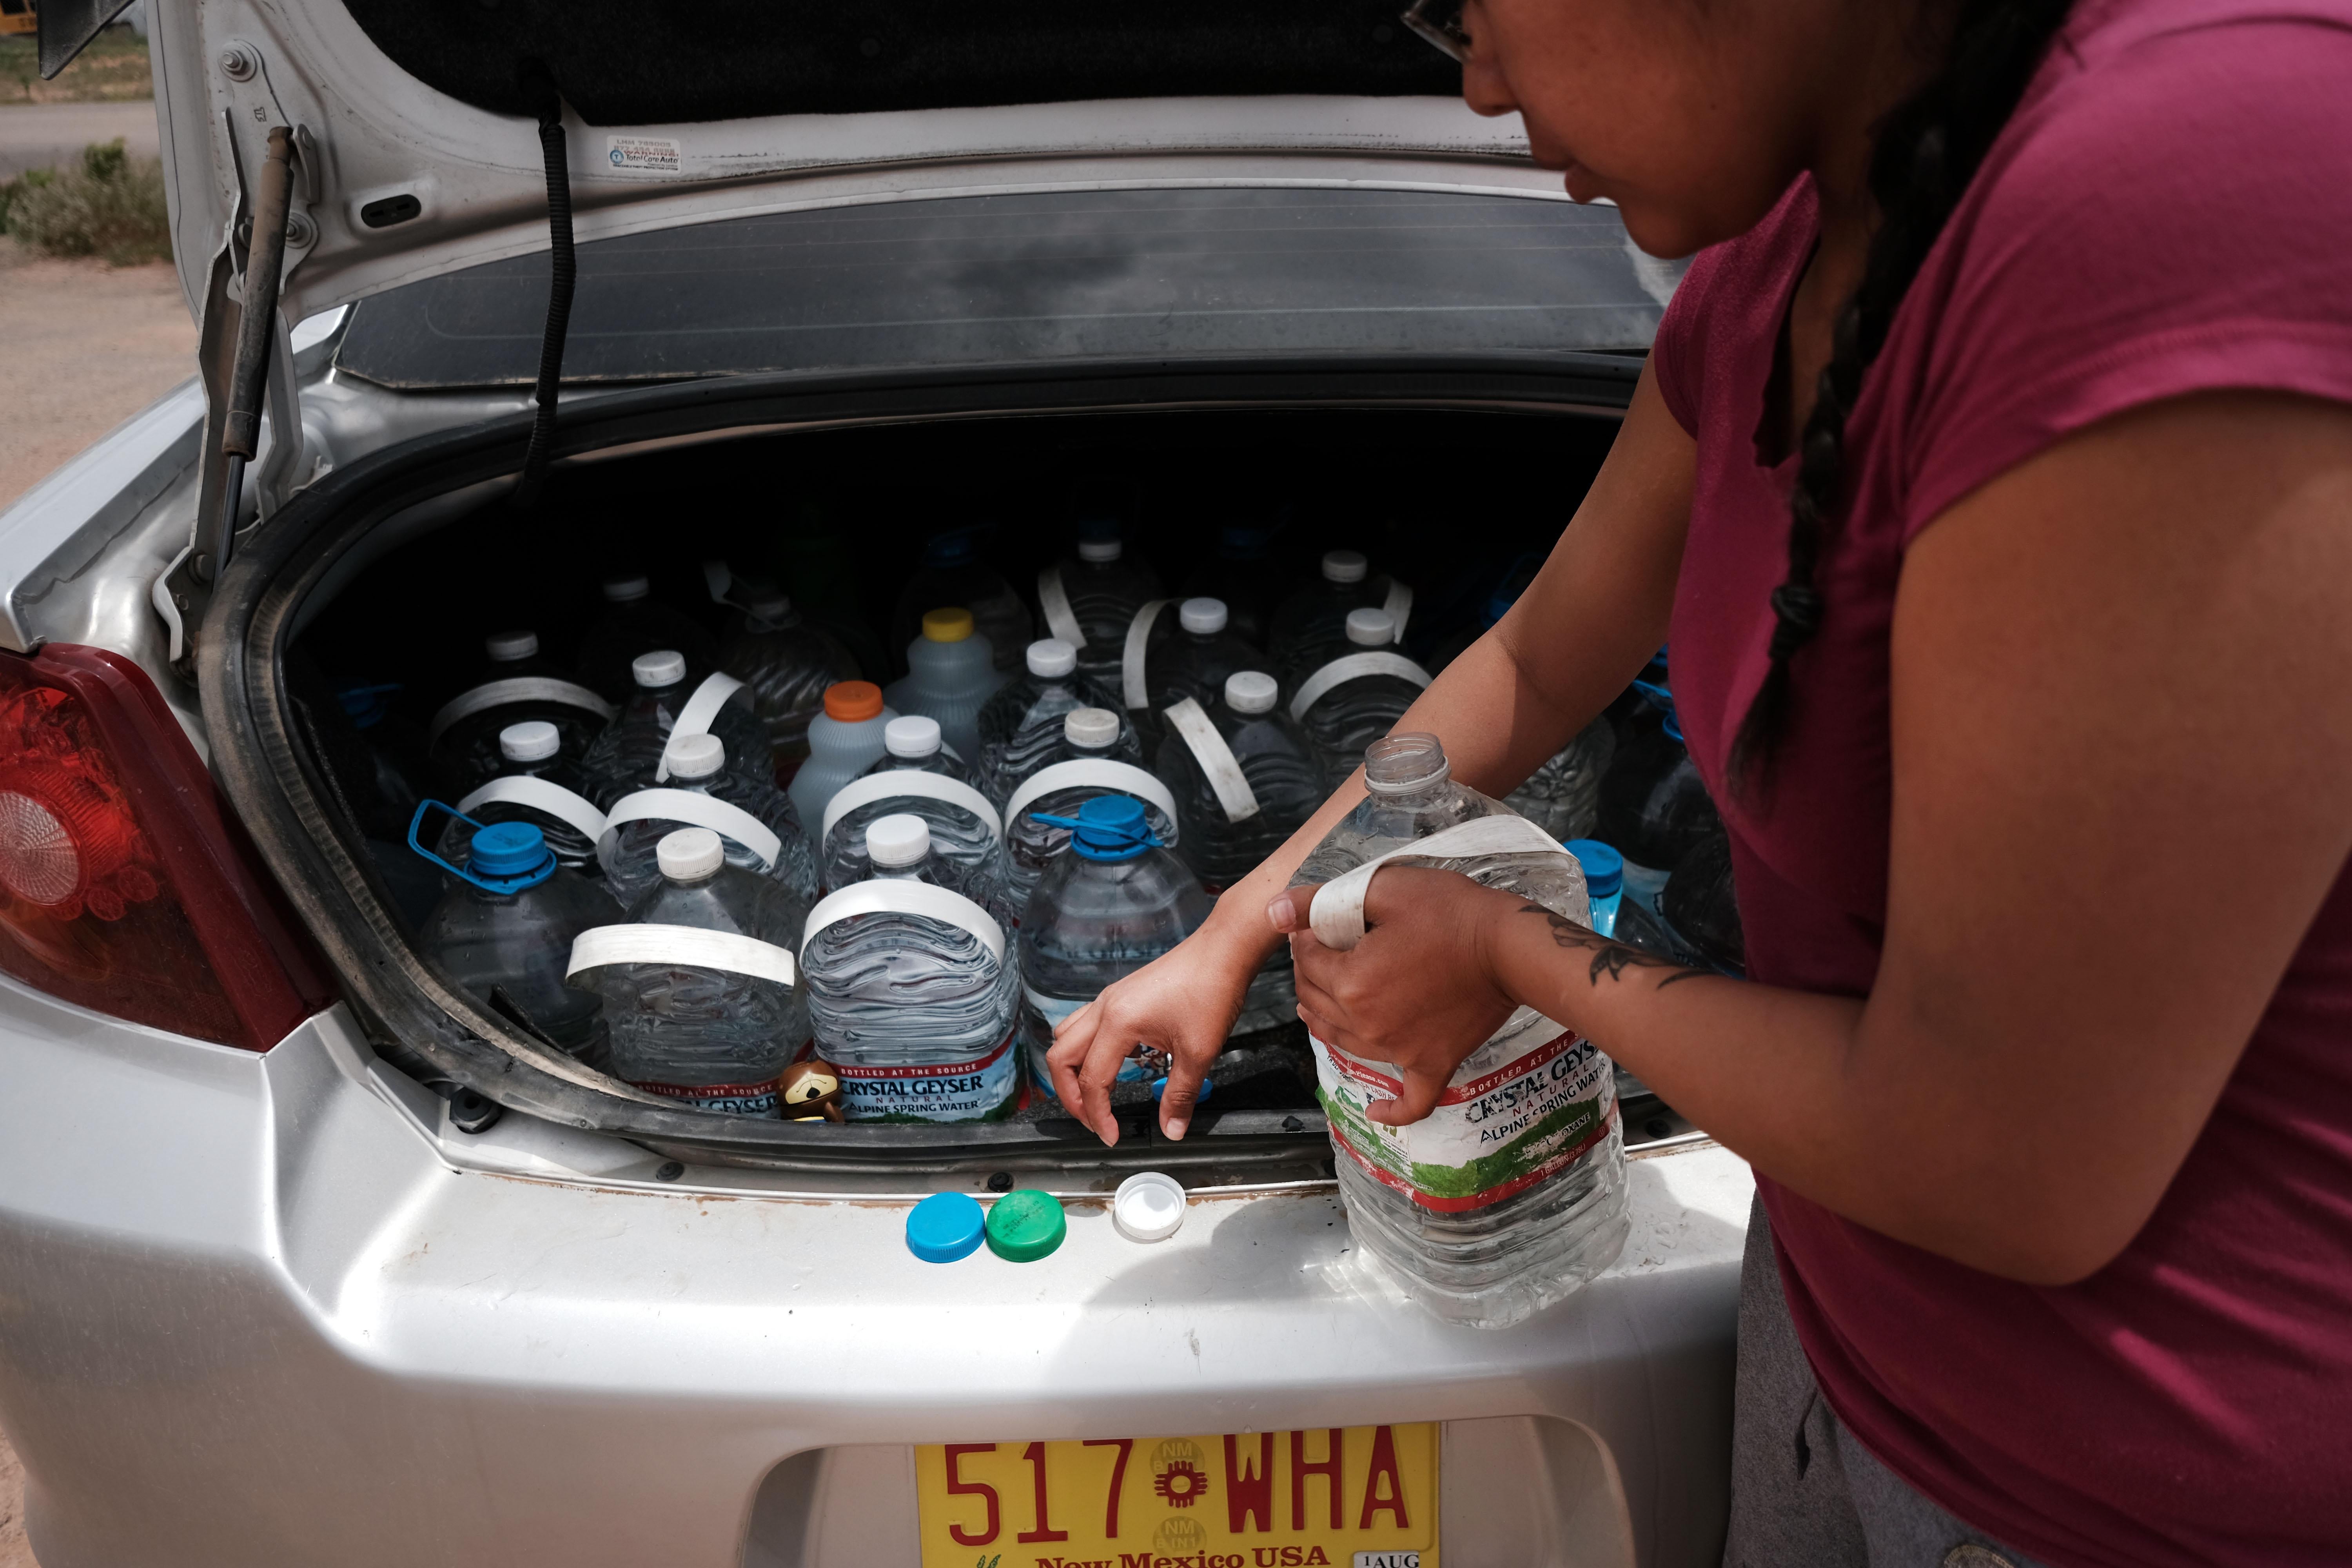 A woman takes big bottle of water out of a car trunk full of plastic water bottles.